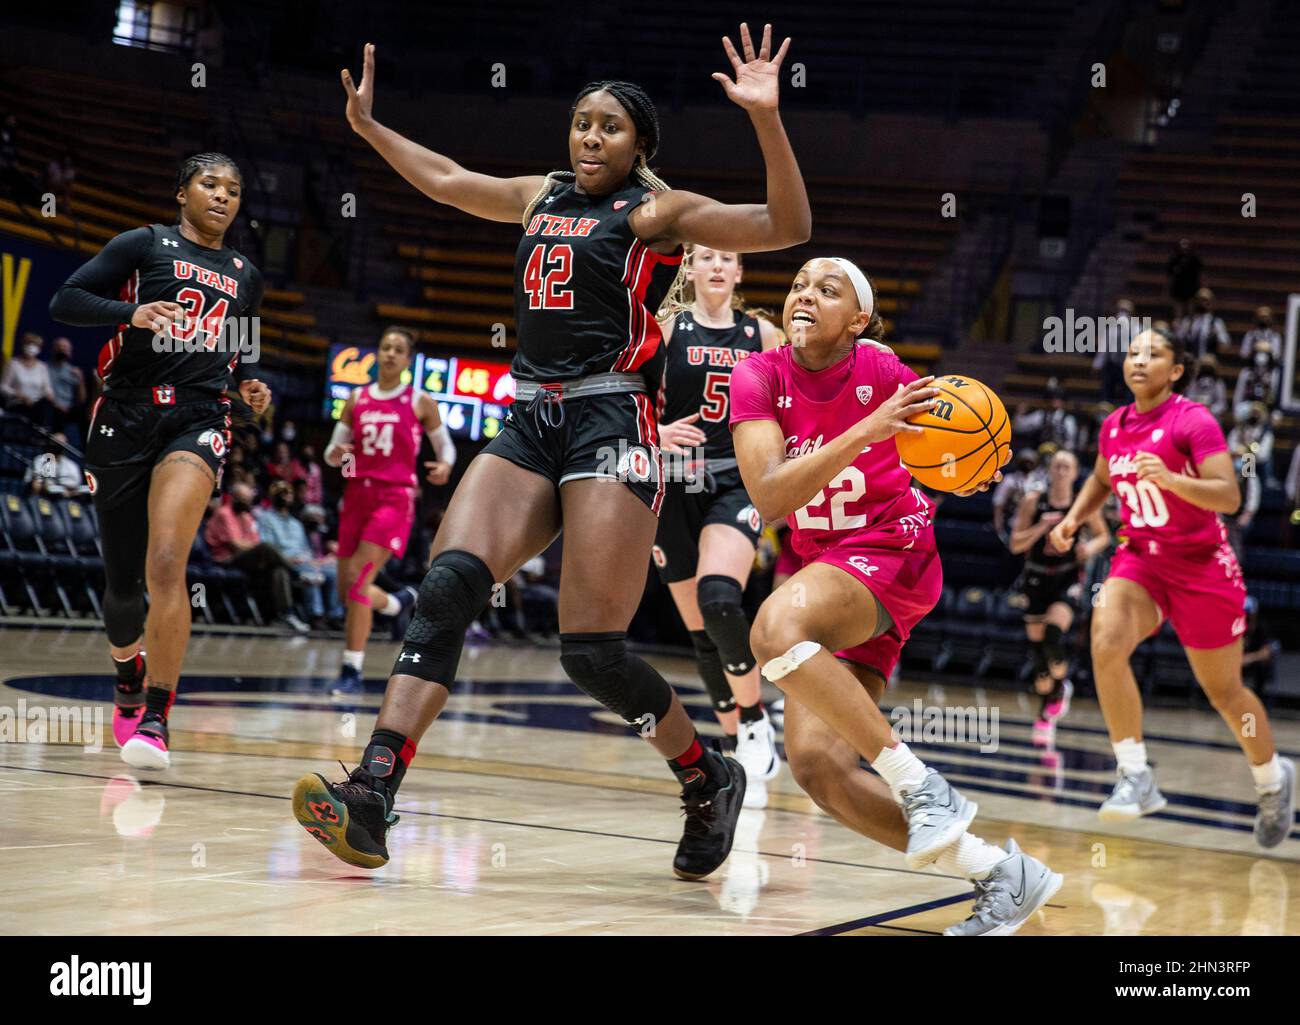 Berkeley, CA U.S. 13th Feb, 2022. A. California guard Cailyn Crocker (22) goes to the basket during the NCAA Women's Basketball game between Utah Utes and the California Golden Bears. Utah beat California in overtime 80-75 at Hass Pavilion Berkeley Calif. Thurman James/CSM/Alamy Live News Stock Photo